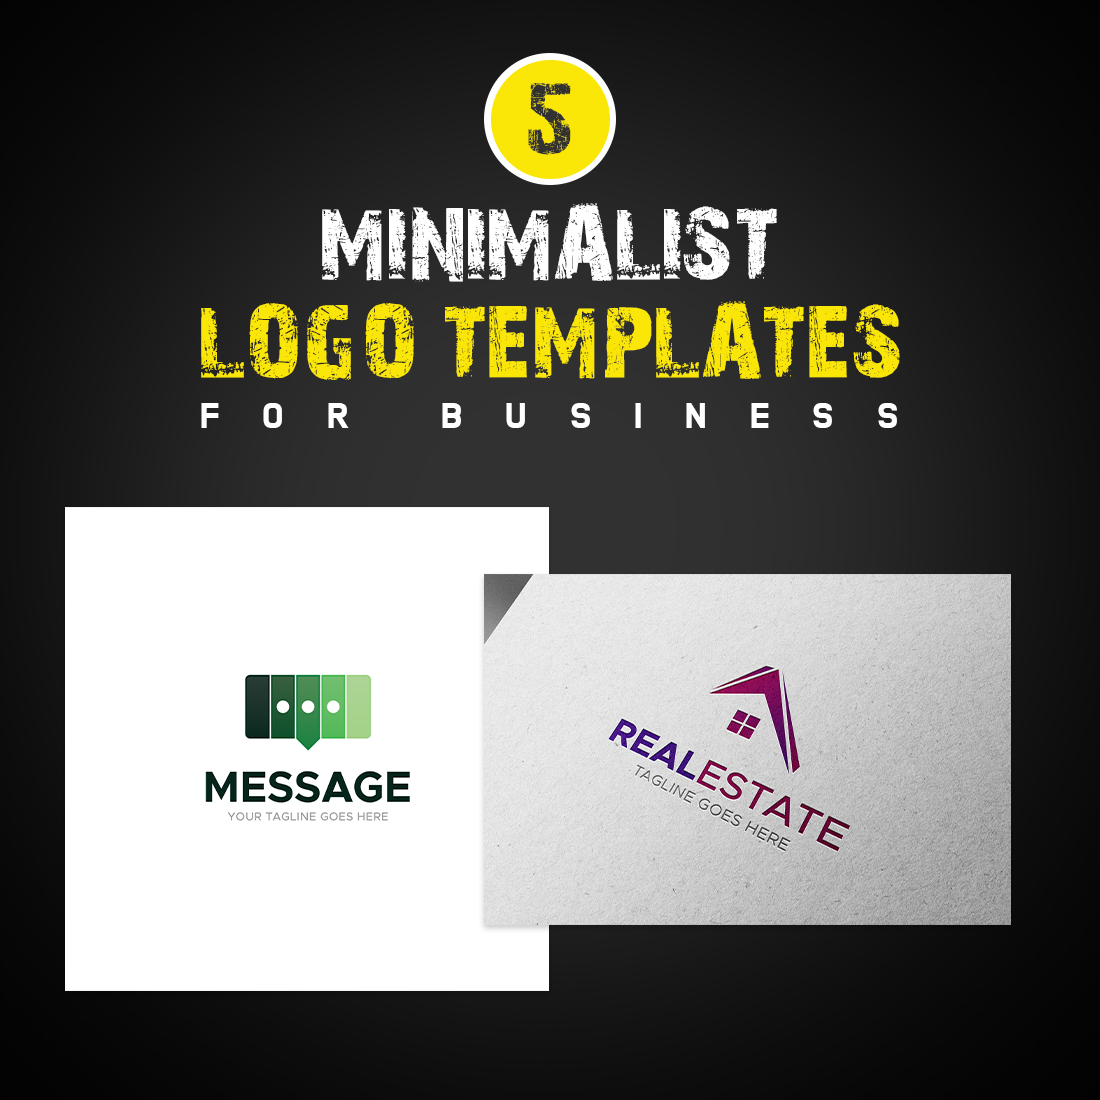 5 Simple & Minimalist Logo Templates For Business cover image.